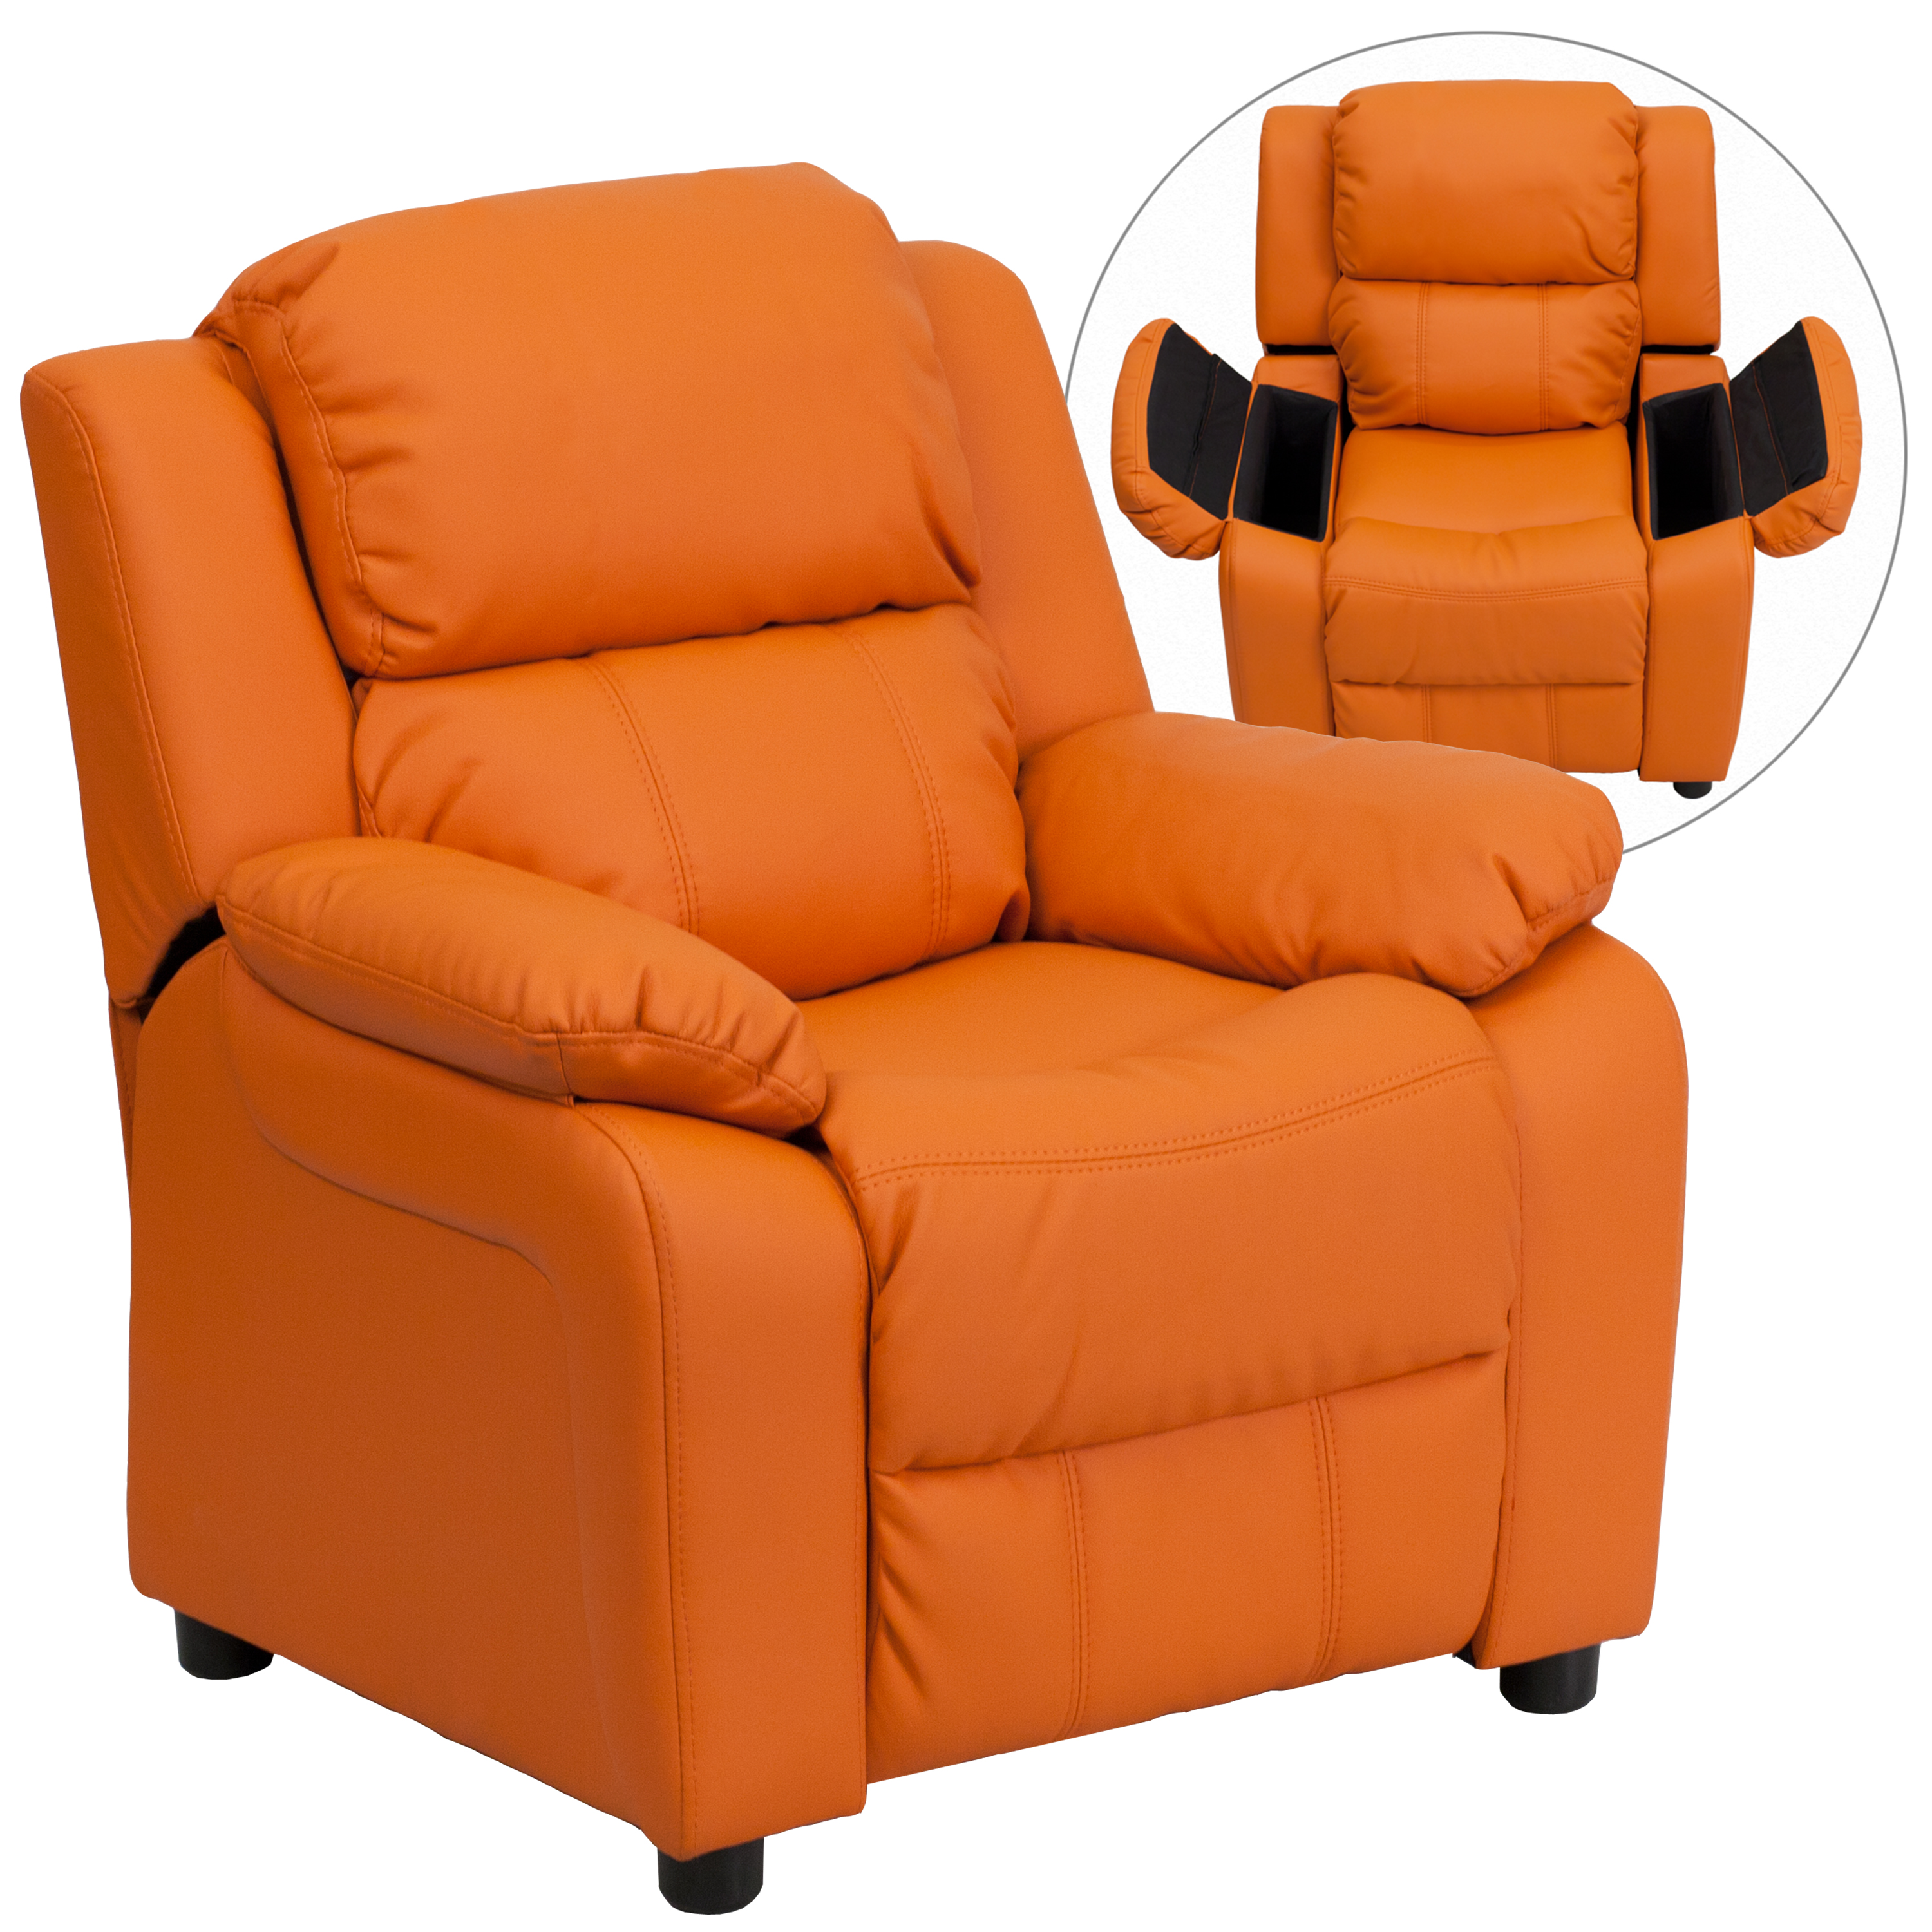 Flash Furniture Deluxe Padded Contemporary Orange Vinyl Kids Recliner with Storage Arms - image 2 of 13